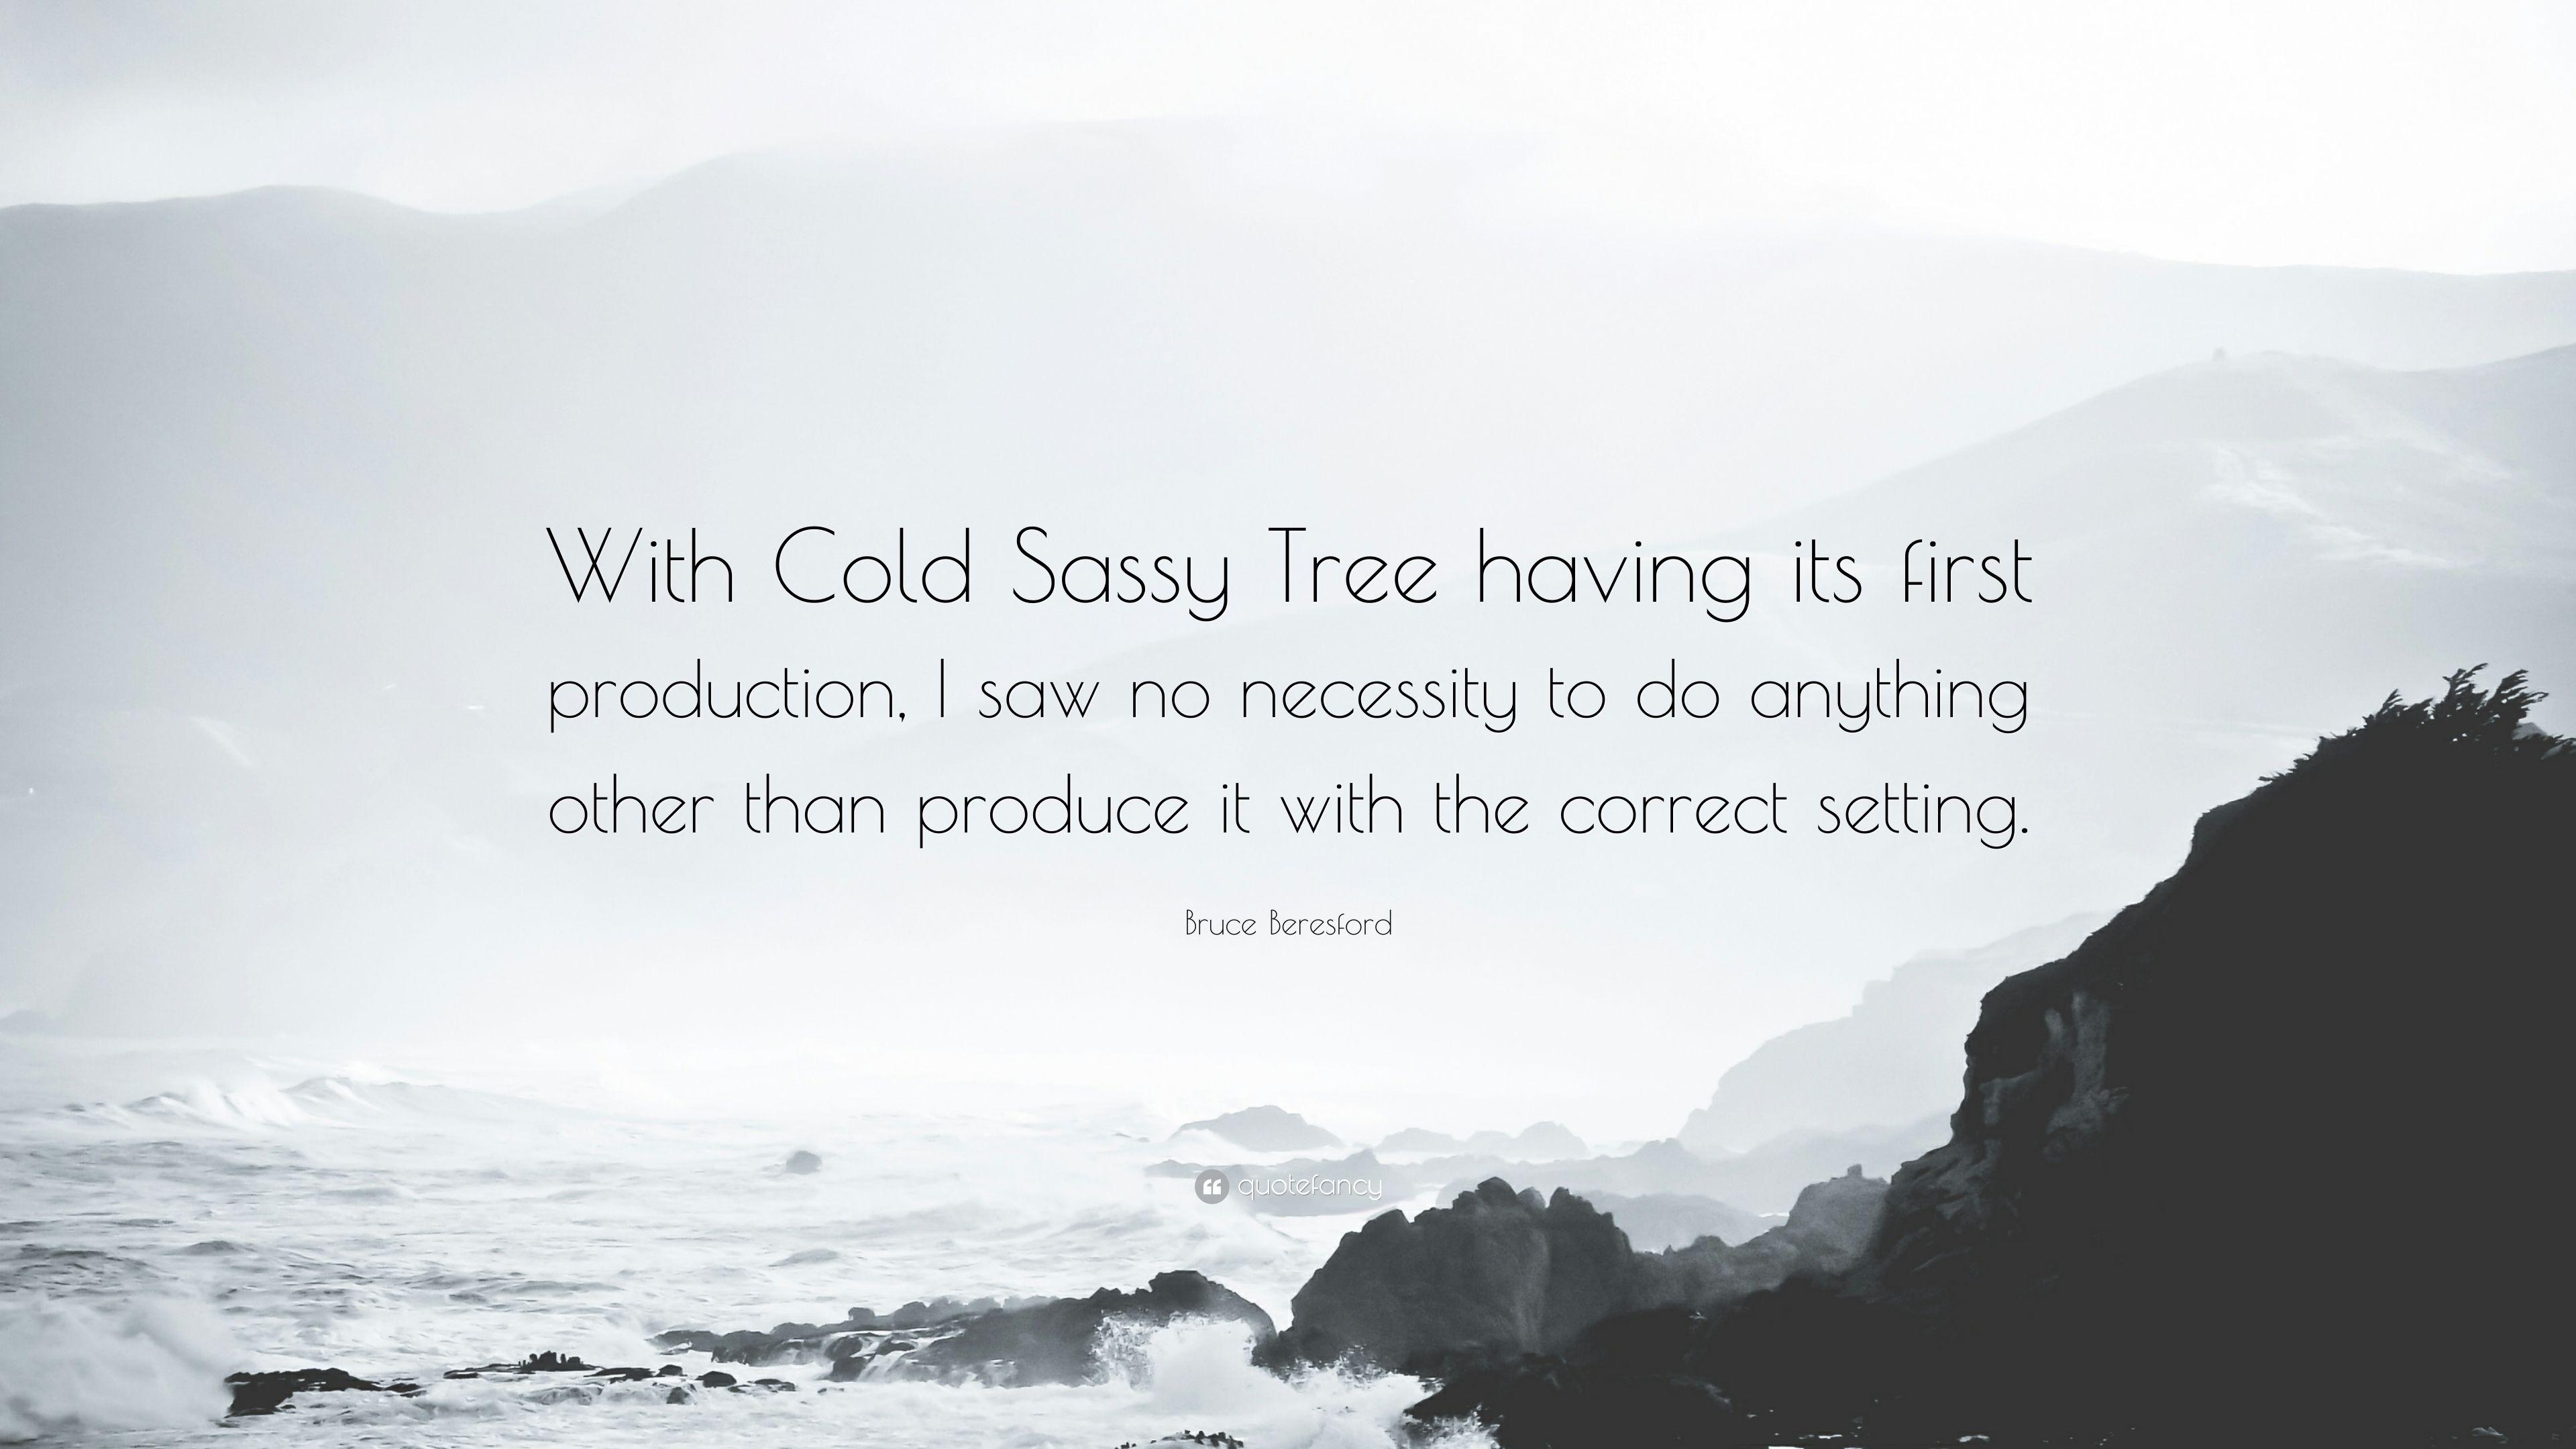 Bruce Beresford Quote: “With Cold Sassy Tree having its first